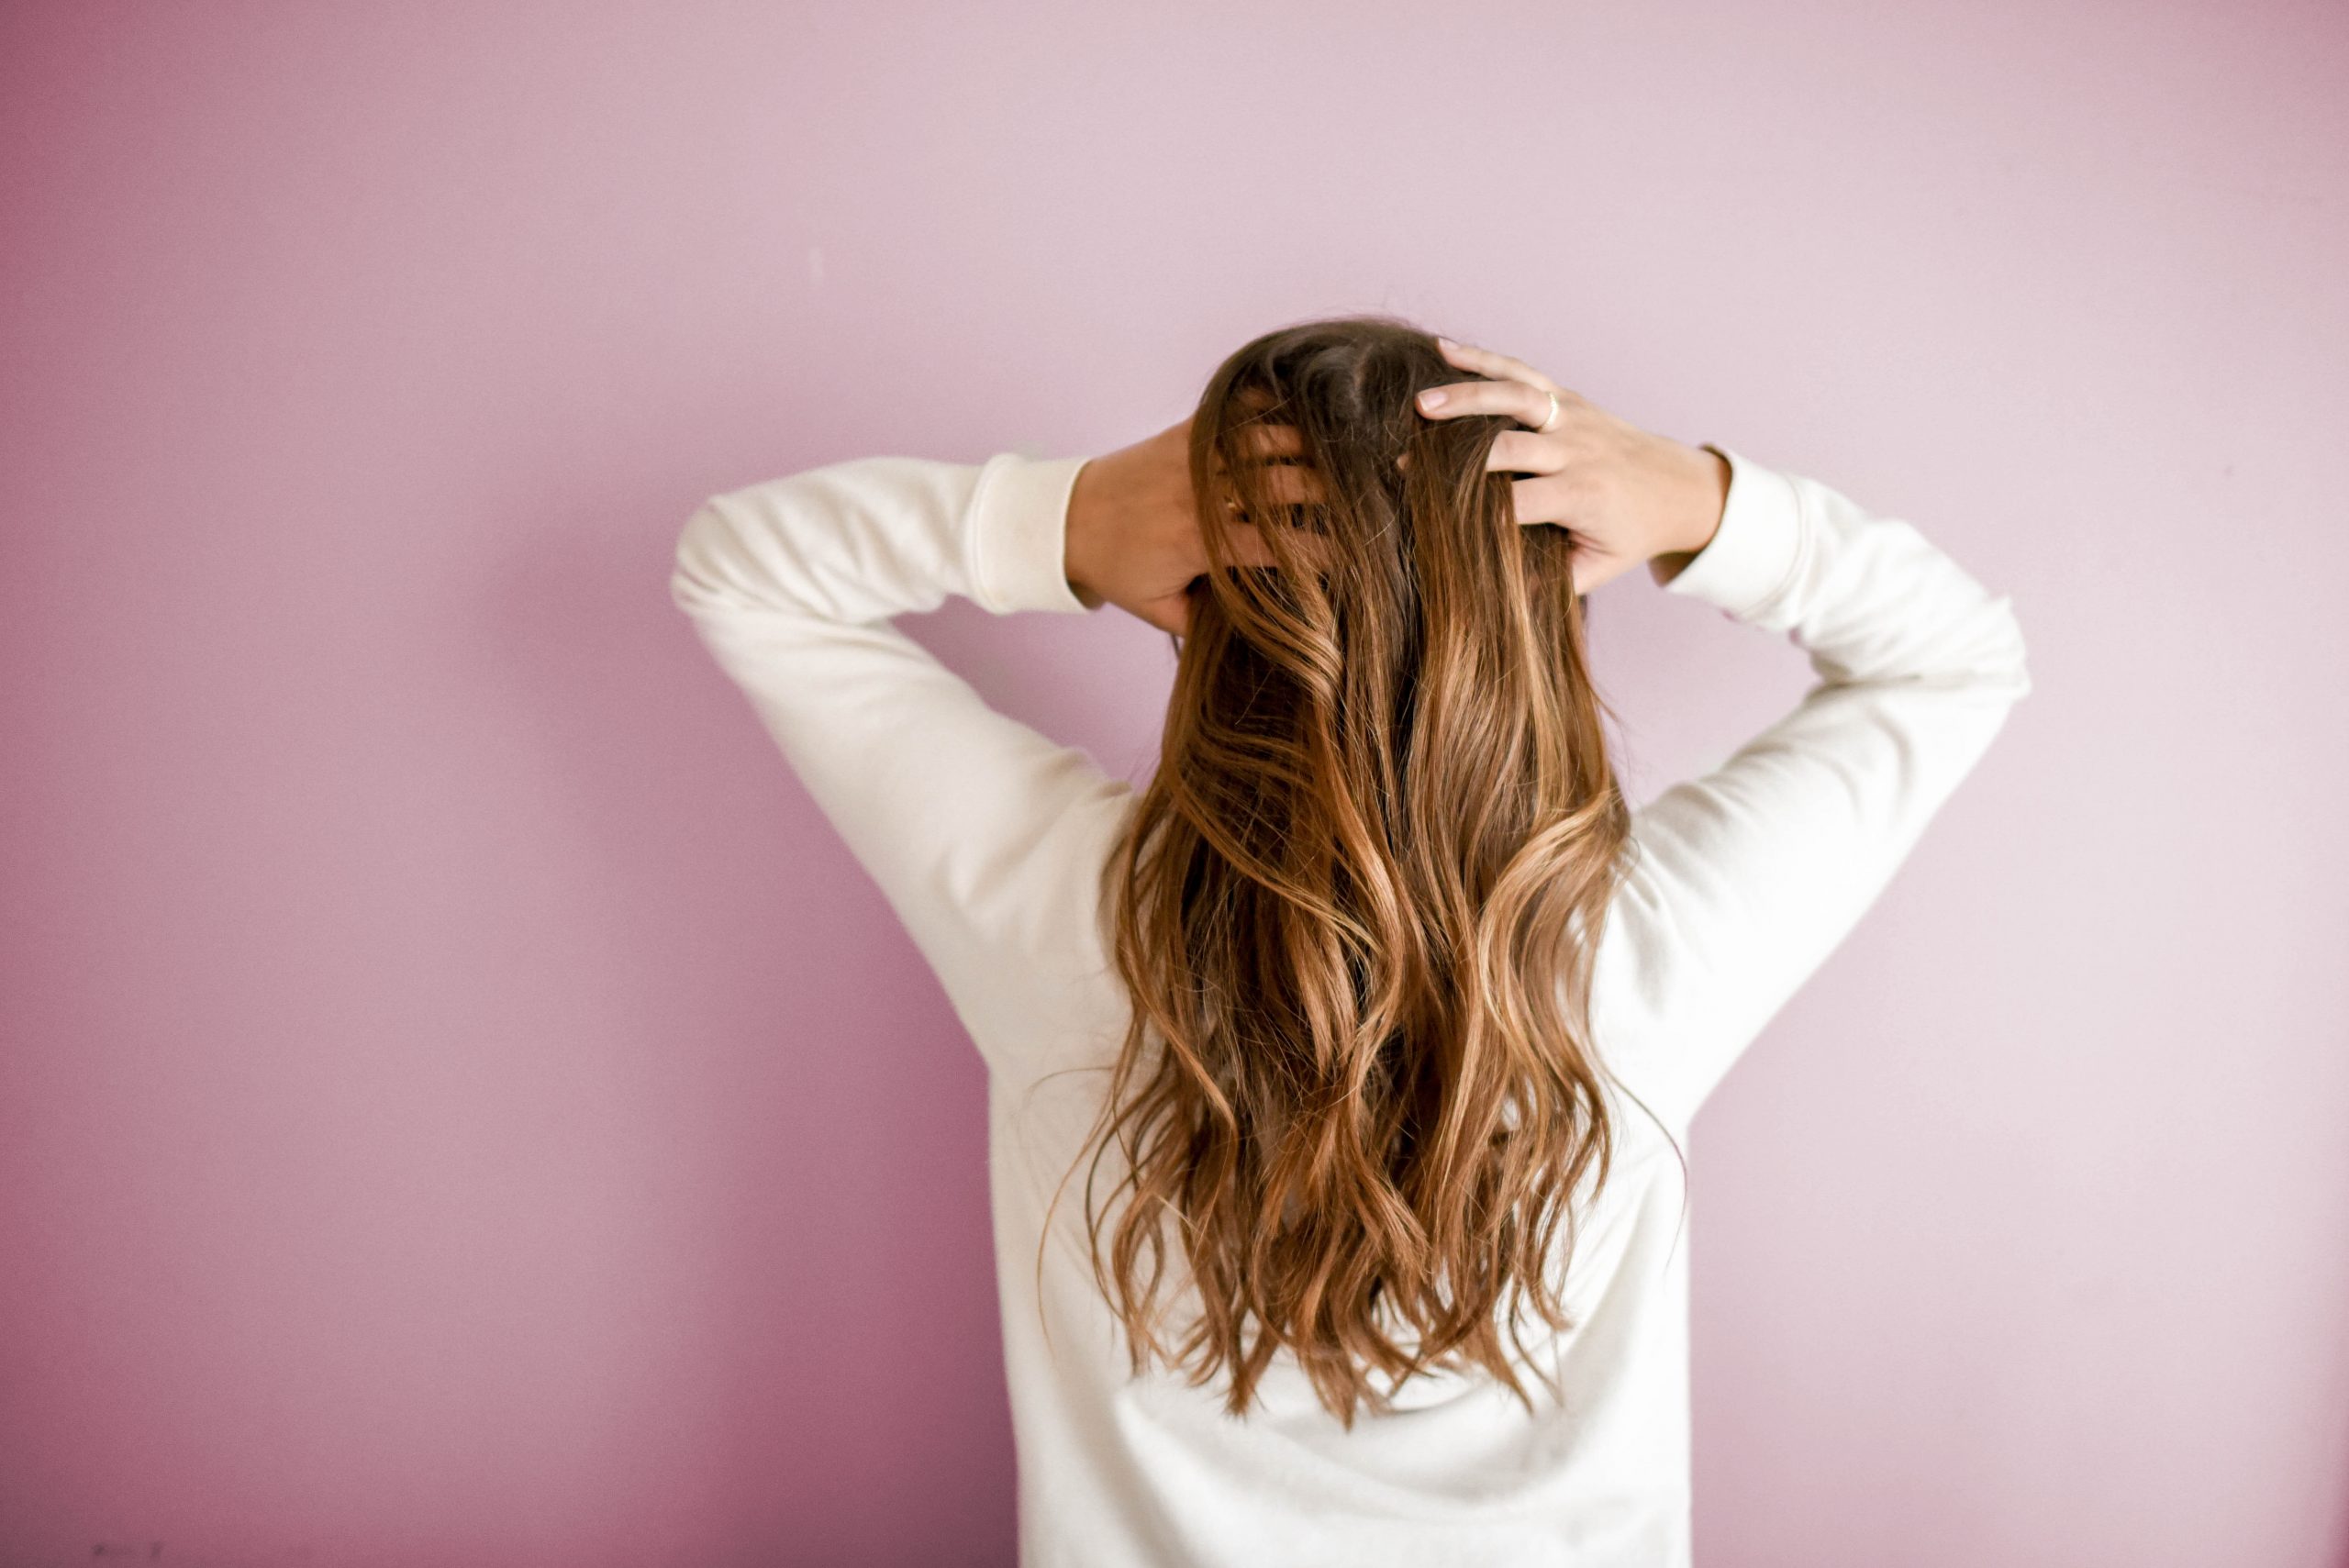 Can Chemotherapy Hair Loss Be Treated?, Wimpole Clinic